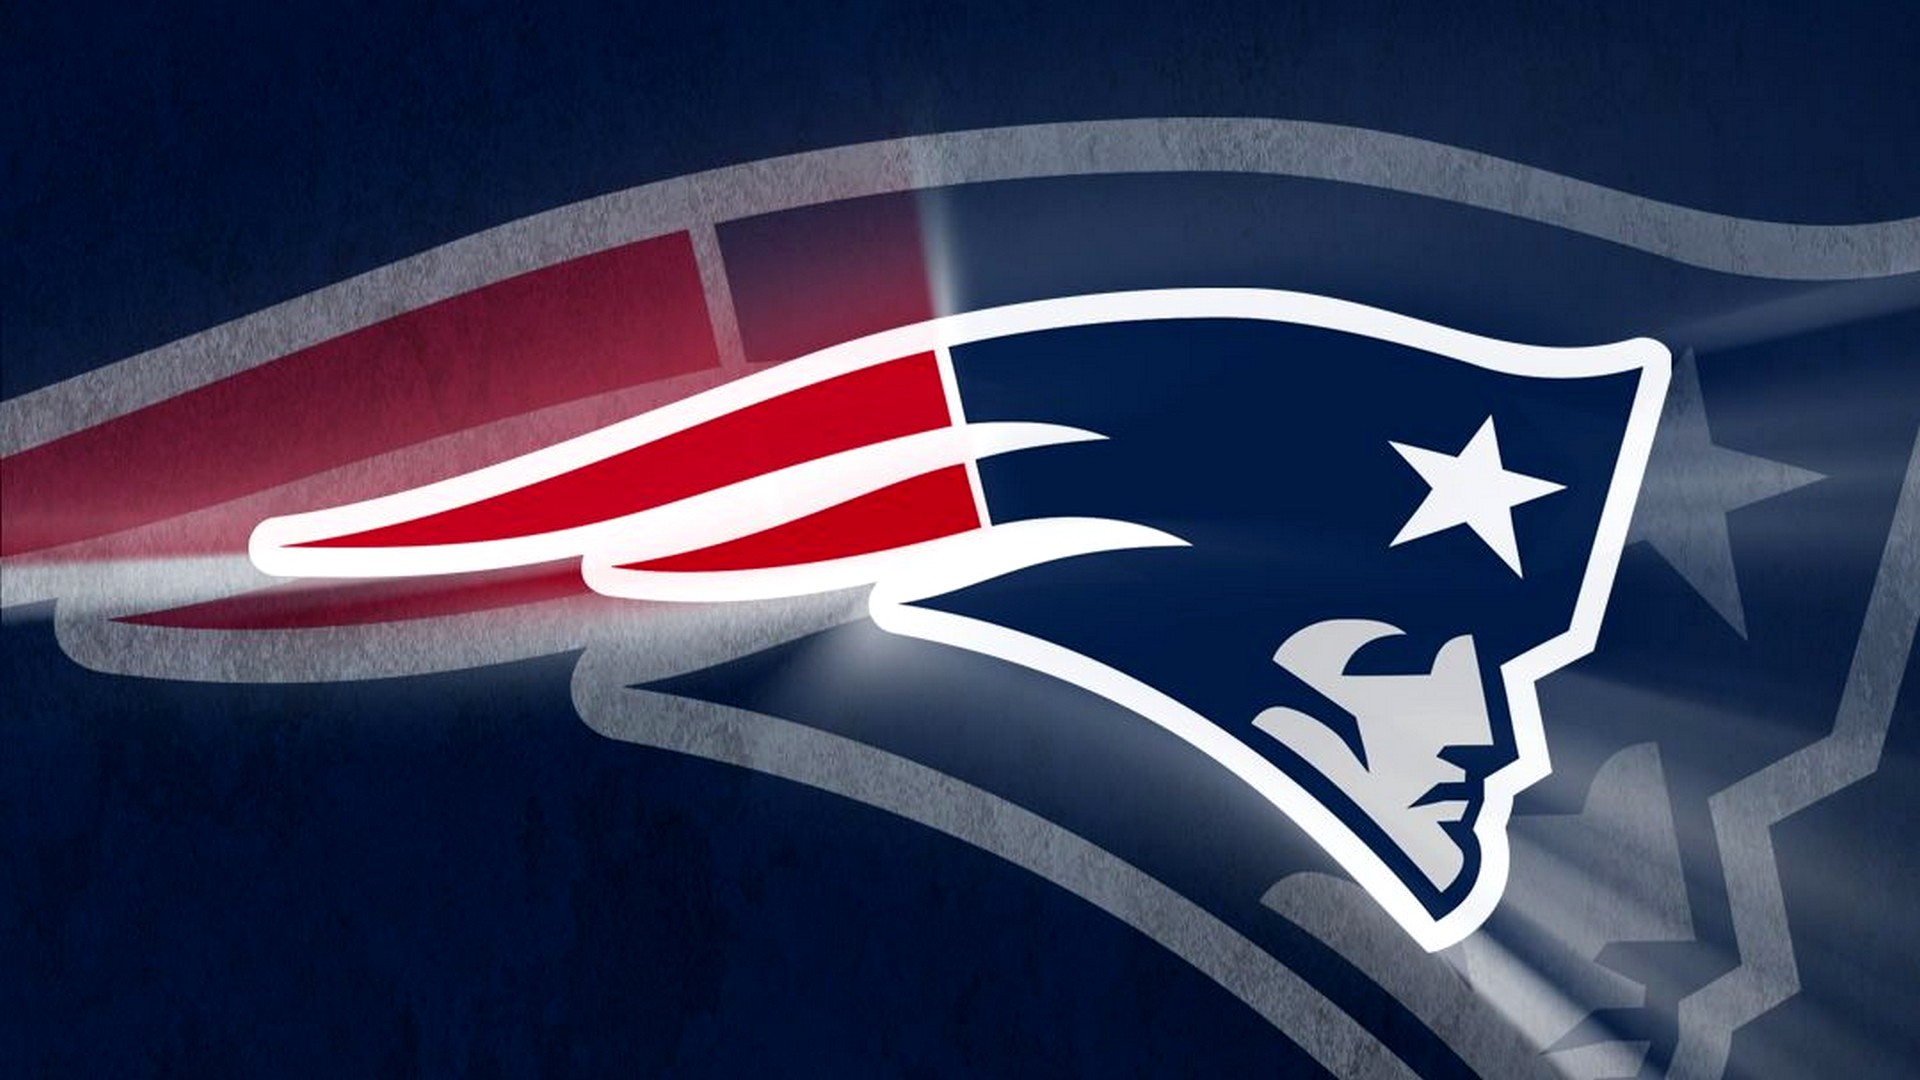 New England Patriots Macbook Backgrounds with high-resolution 1920x1080 pixel. You can use and set as wallpaper for Notebook Screensavers, Mac Wallpapers, Mobile Home Screen, iPhone or Android Phones Lock Screen